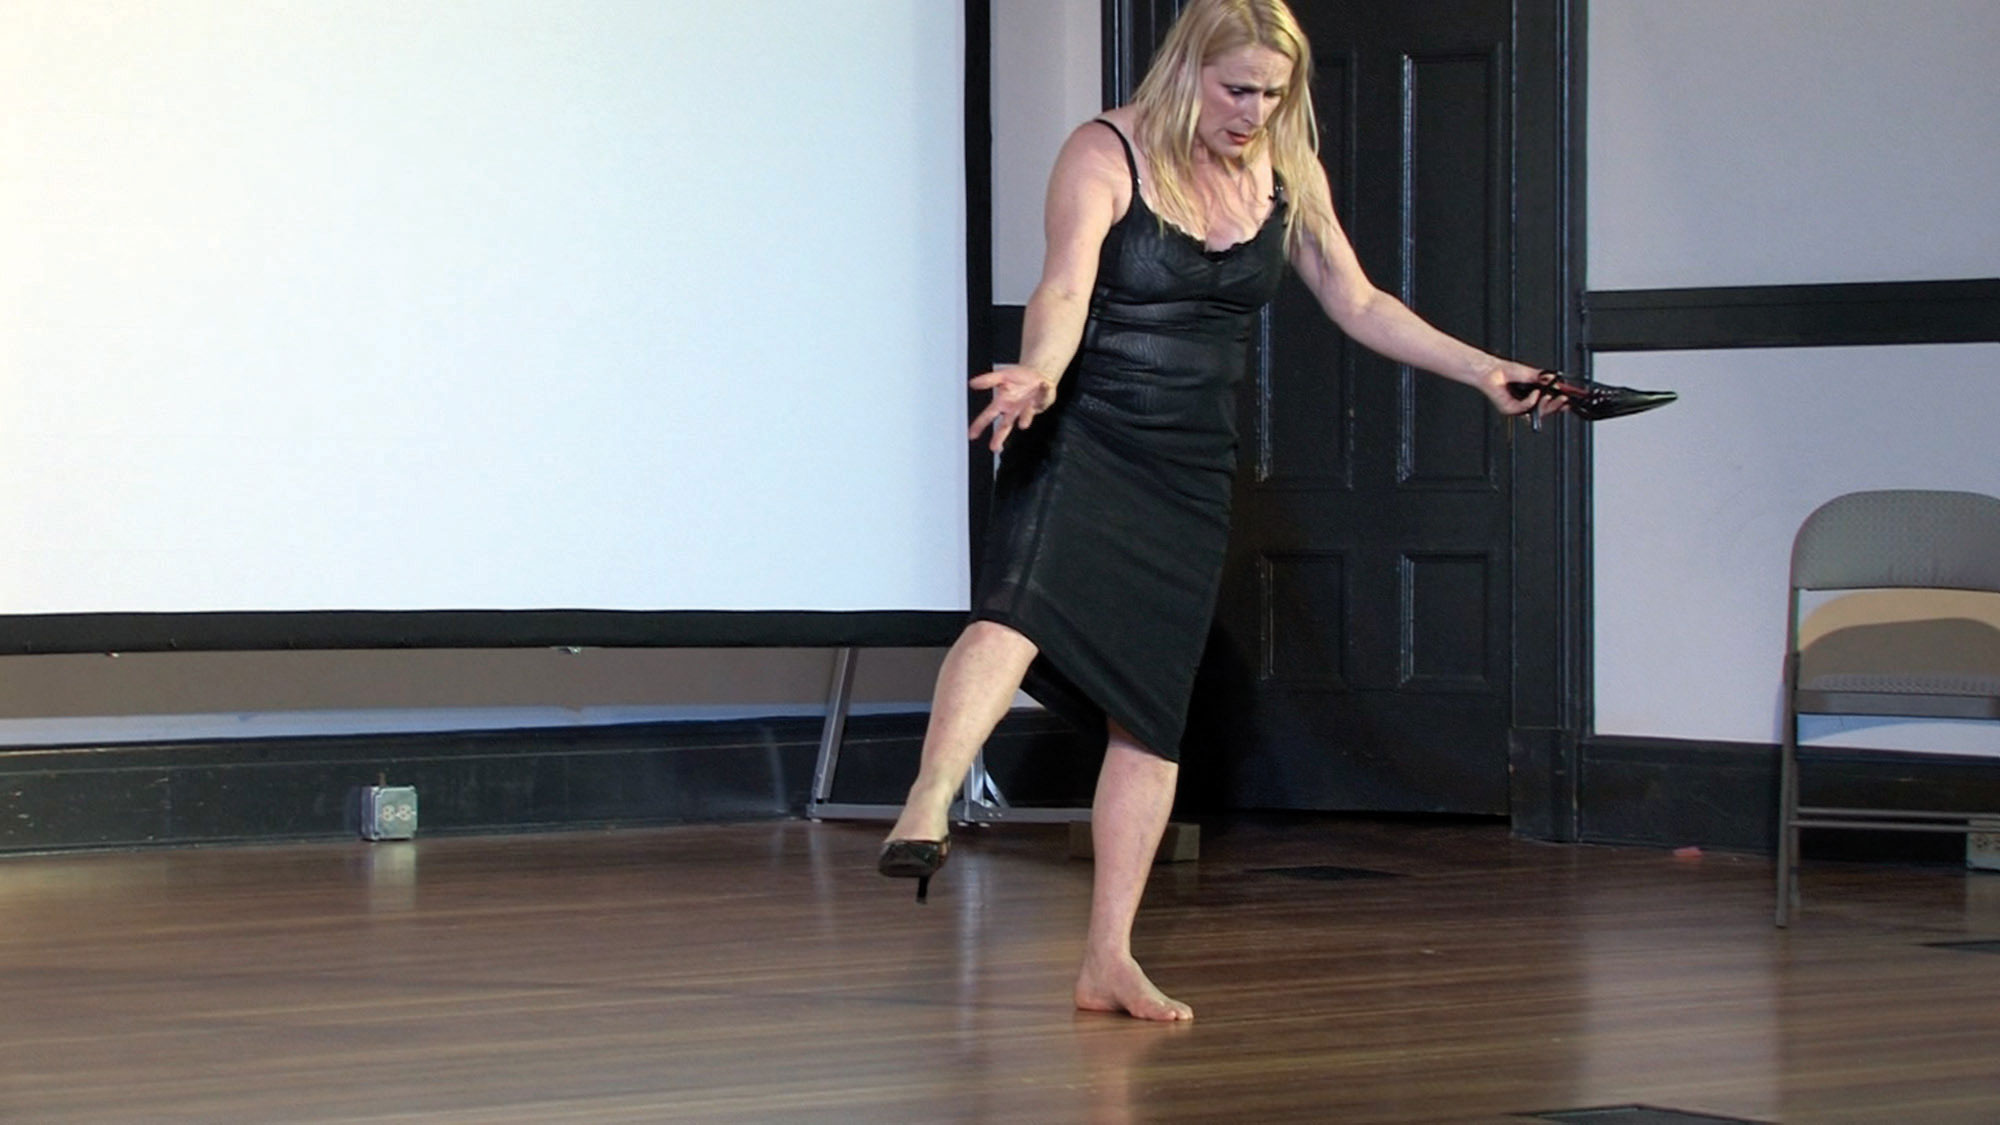 A femme dancer wearing a black slip dress and one black heel standing on the shoeless foot with the other leg extended and clutching the missing black heel. She looks down with hands out to the side. 